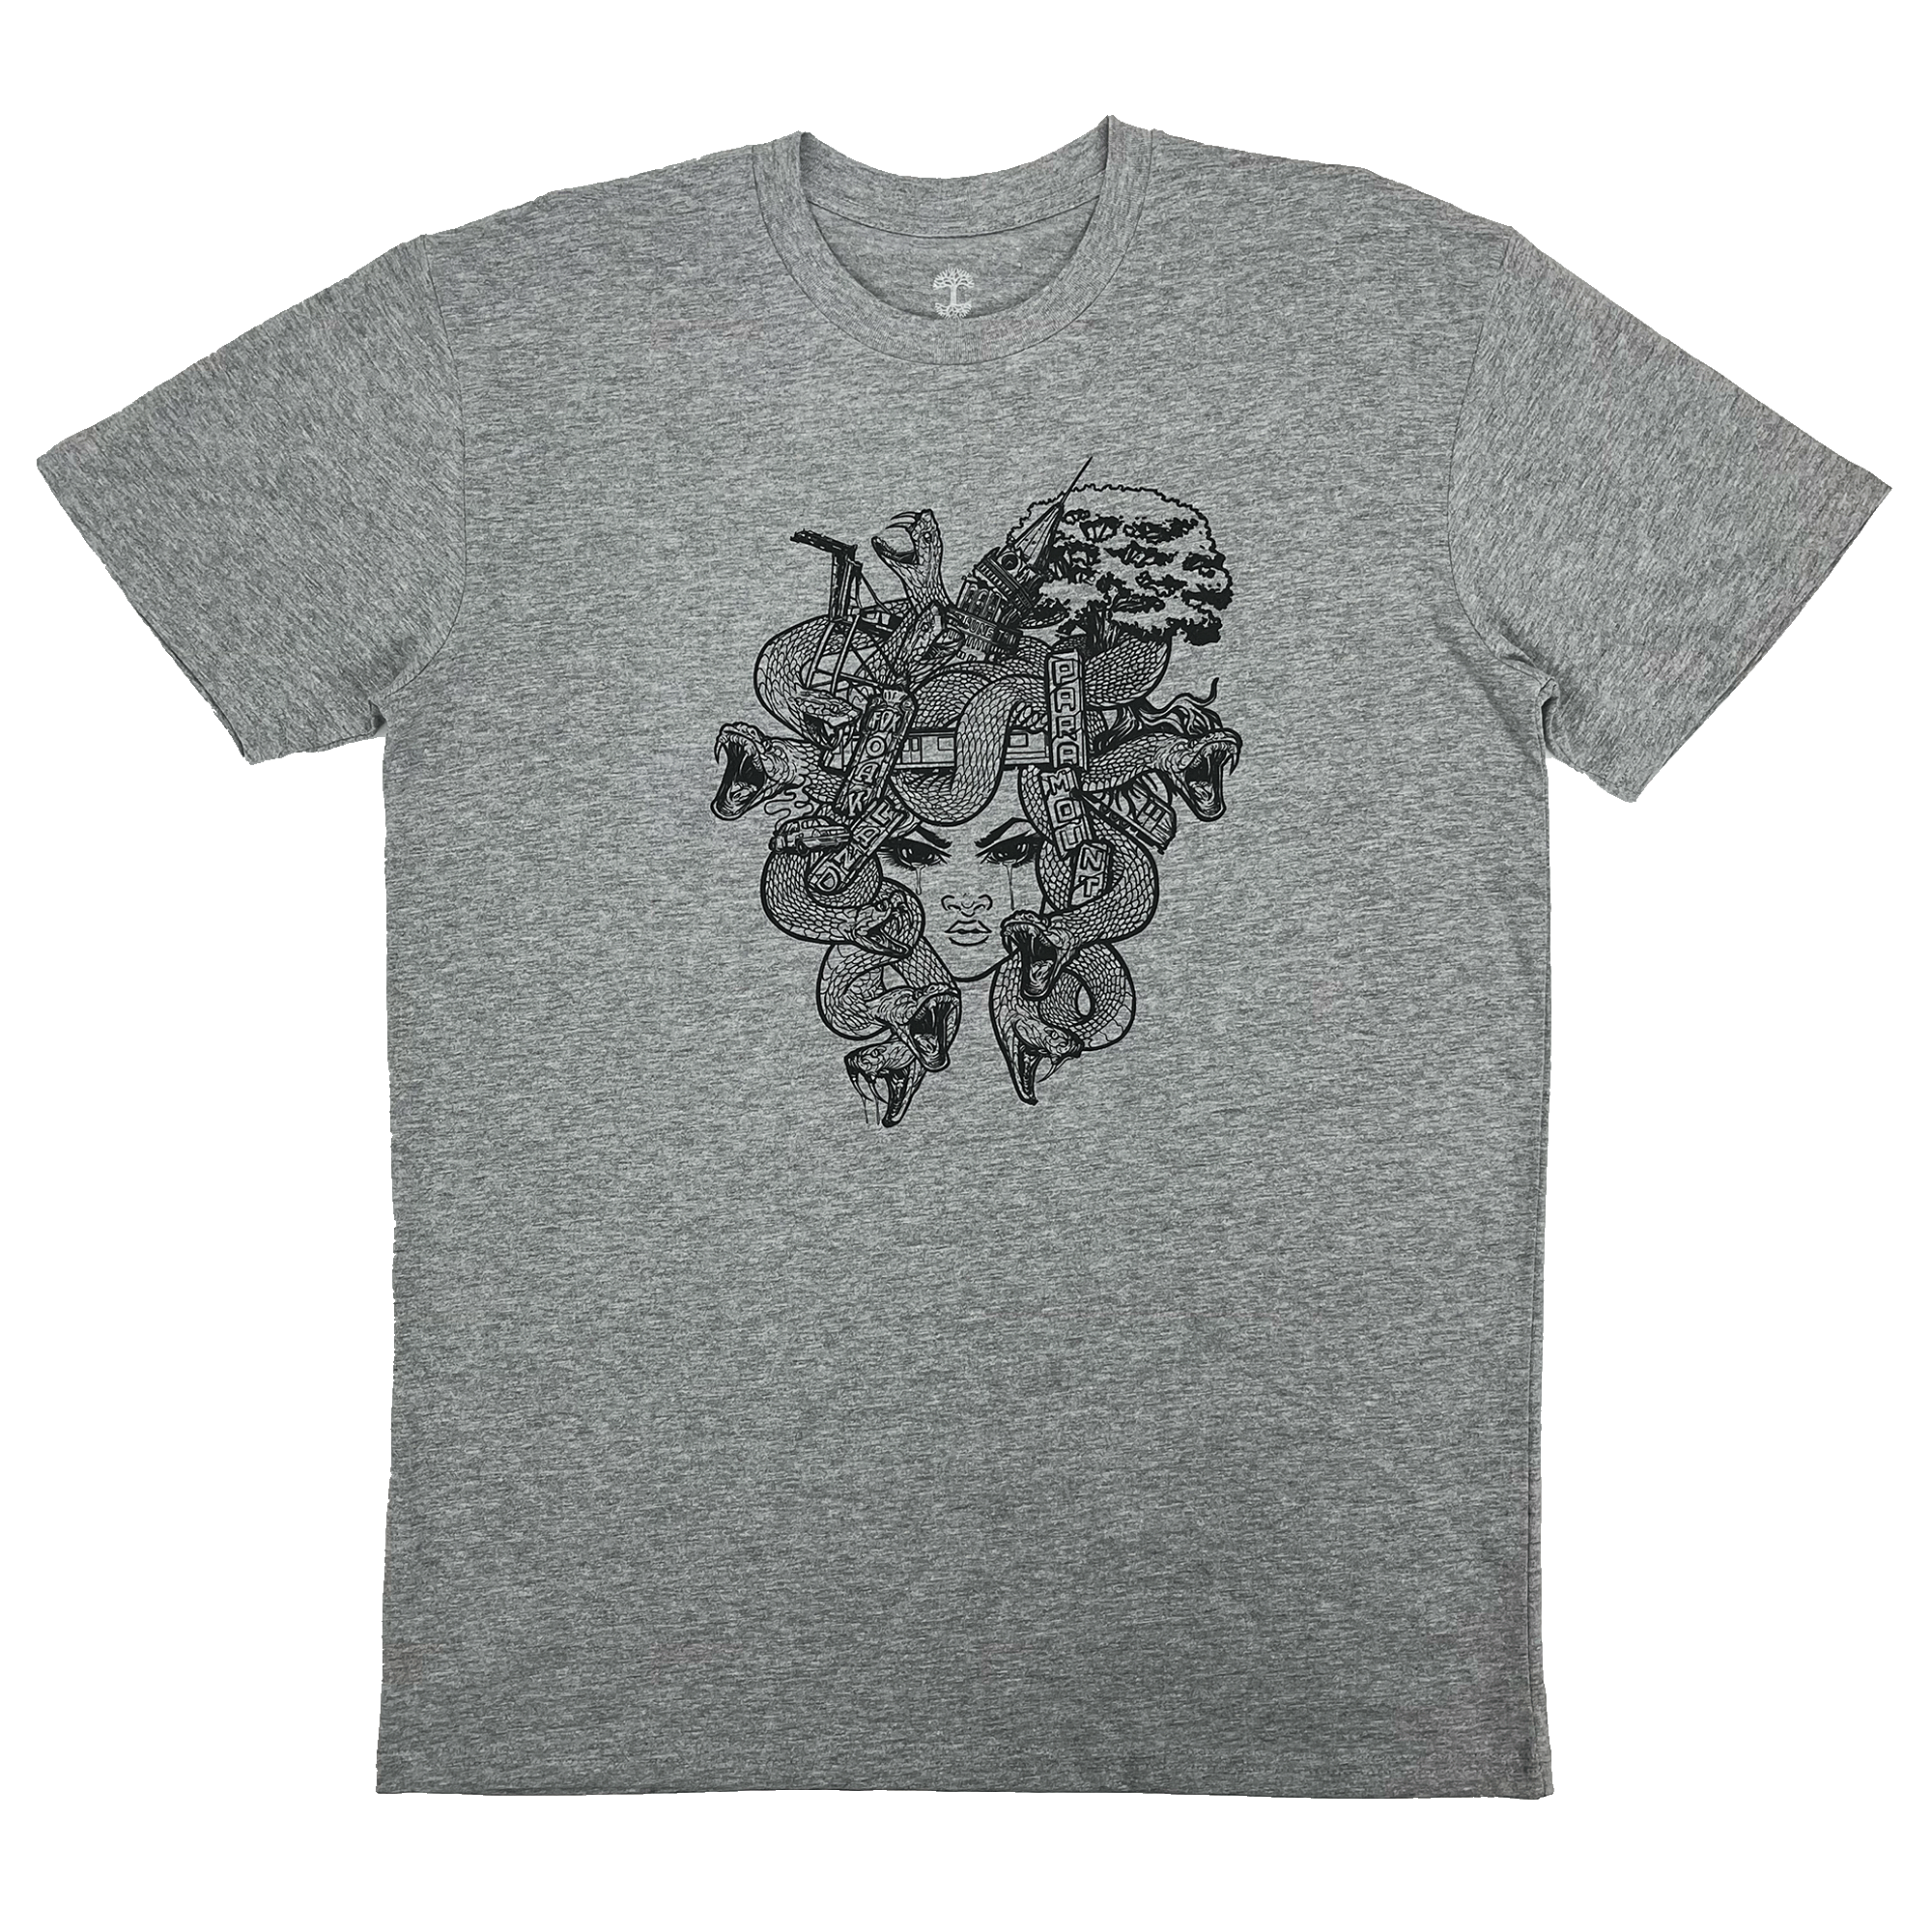 Front view of an athletic grey t-shirt with elaborate Medusa monster of the mind graphic.